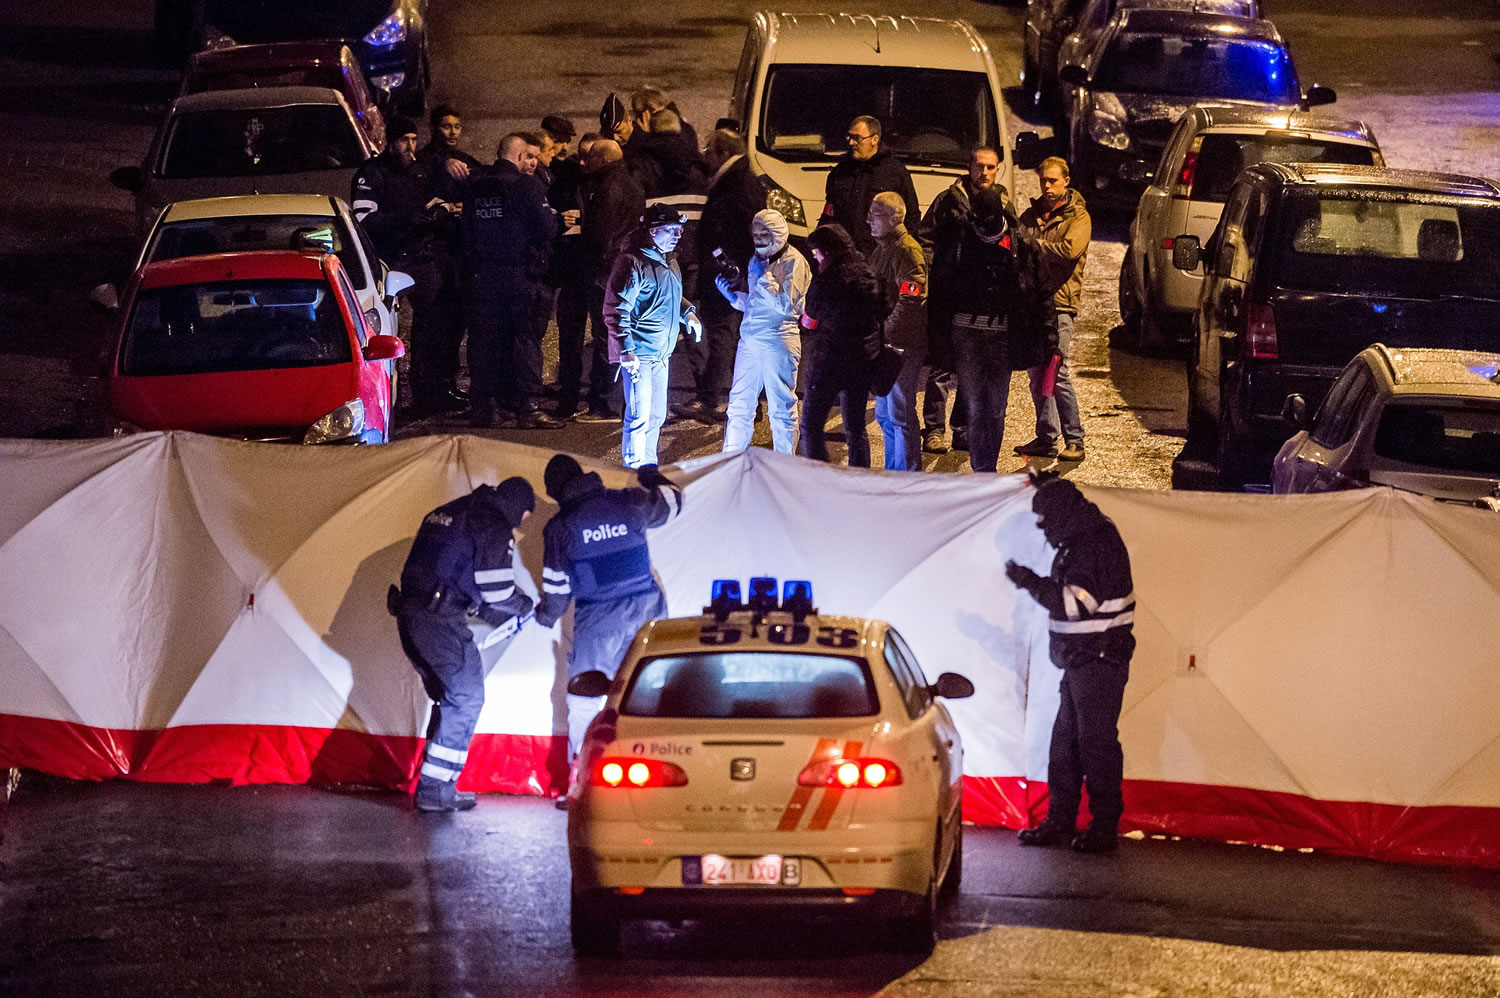 Police investigate a shootout in a street Thursday in Verviers, Belgium.